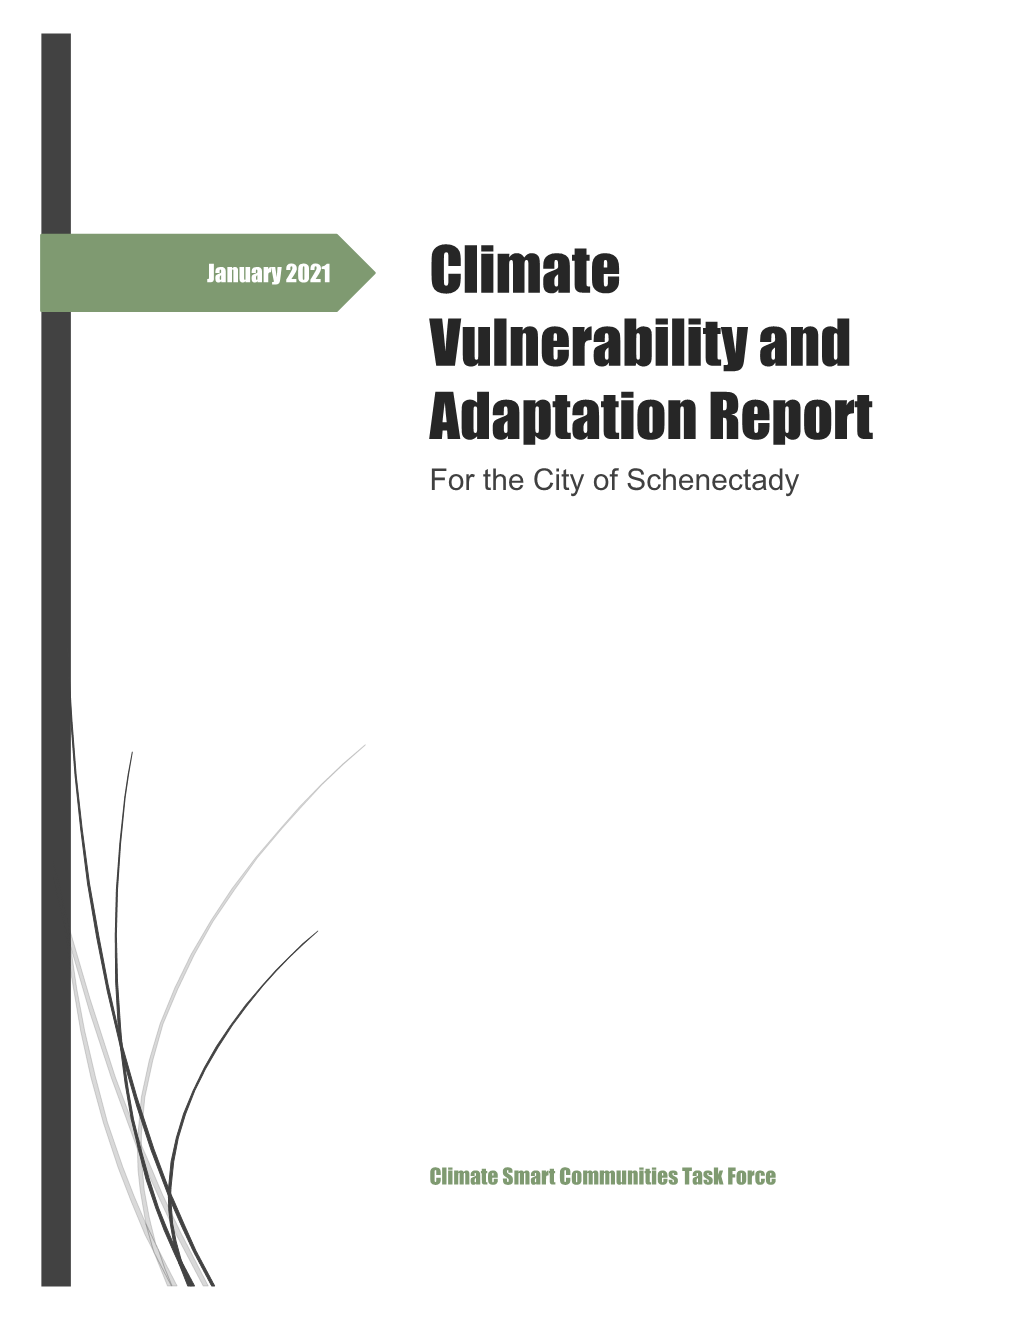 Climate Vulnerability and Adaptation Report for the City of Schenectady